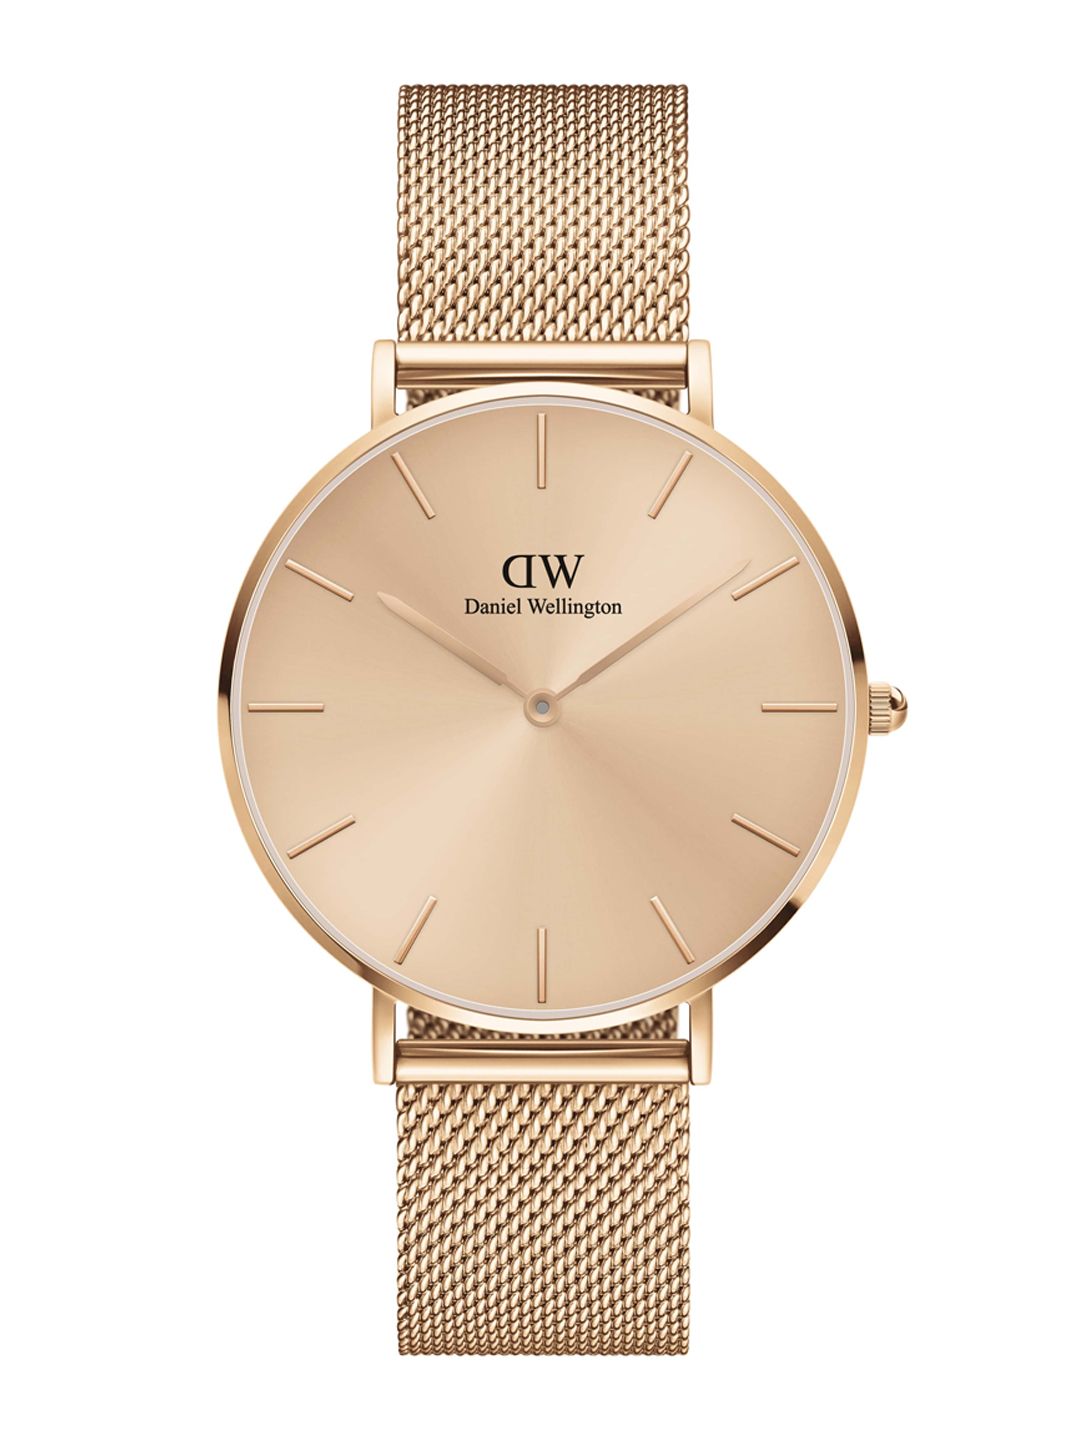 Daniel Wellington Unisex Rose Gold-Toned Dial & Rose Gold-Plated Straps Watch DW00100472 Price in India